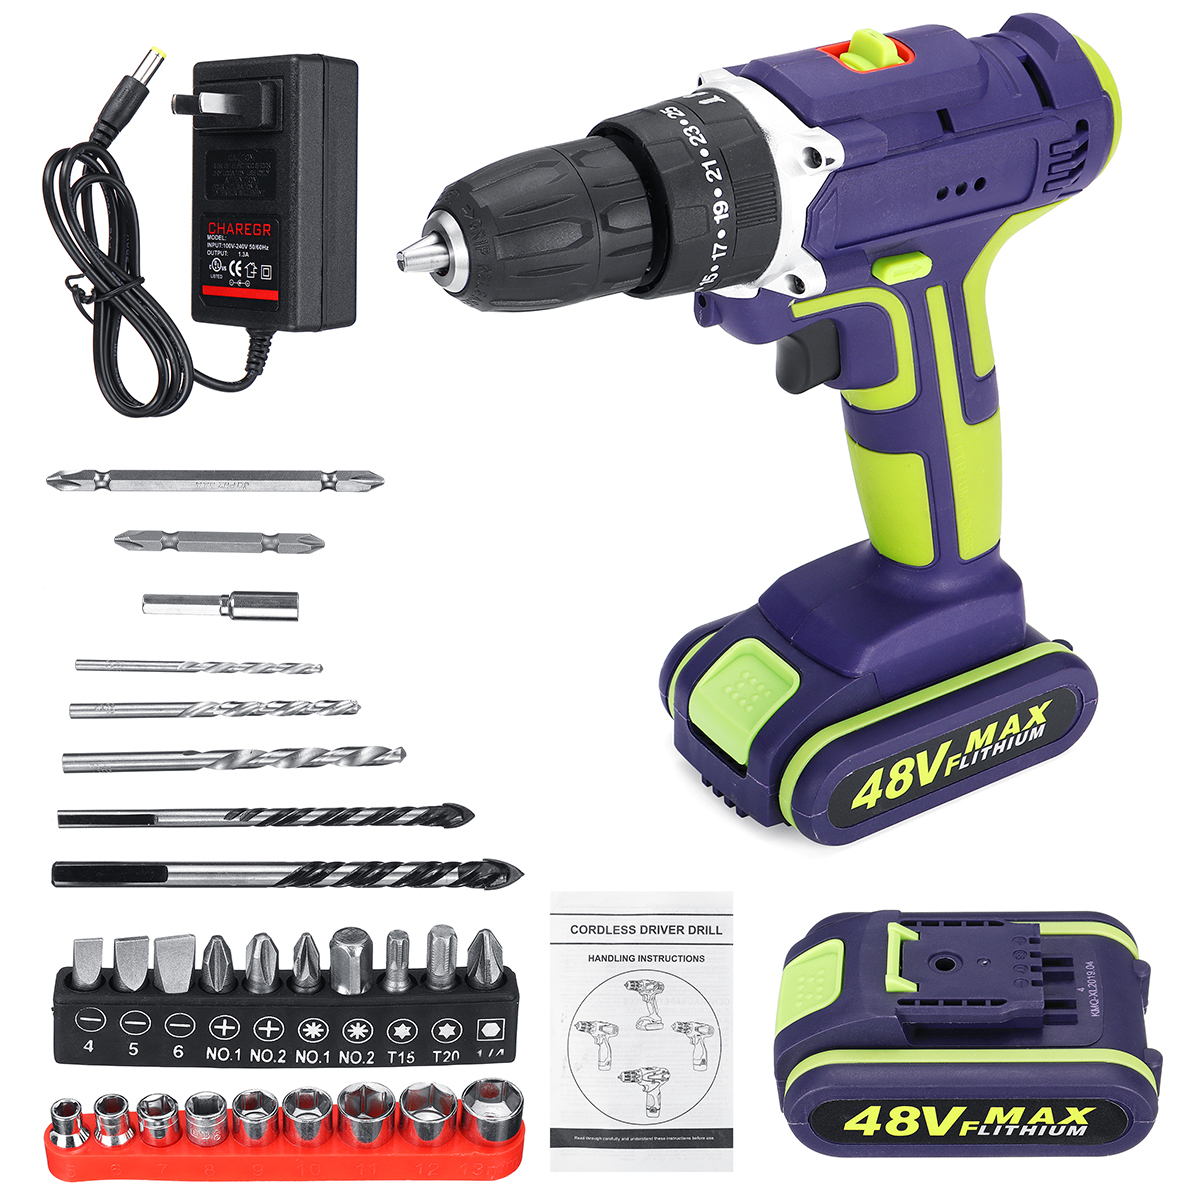 100-240V-50Nm-3-In-1-Electric-Hammer-Drill-Cordless-Drill-Double-Speed-Power-Drills-1809843-1